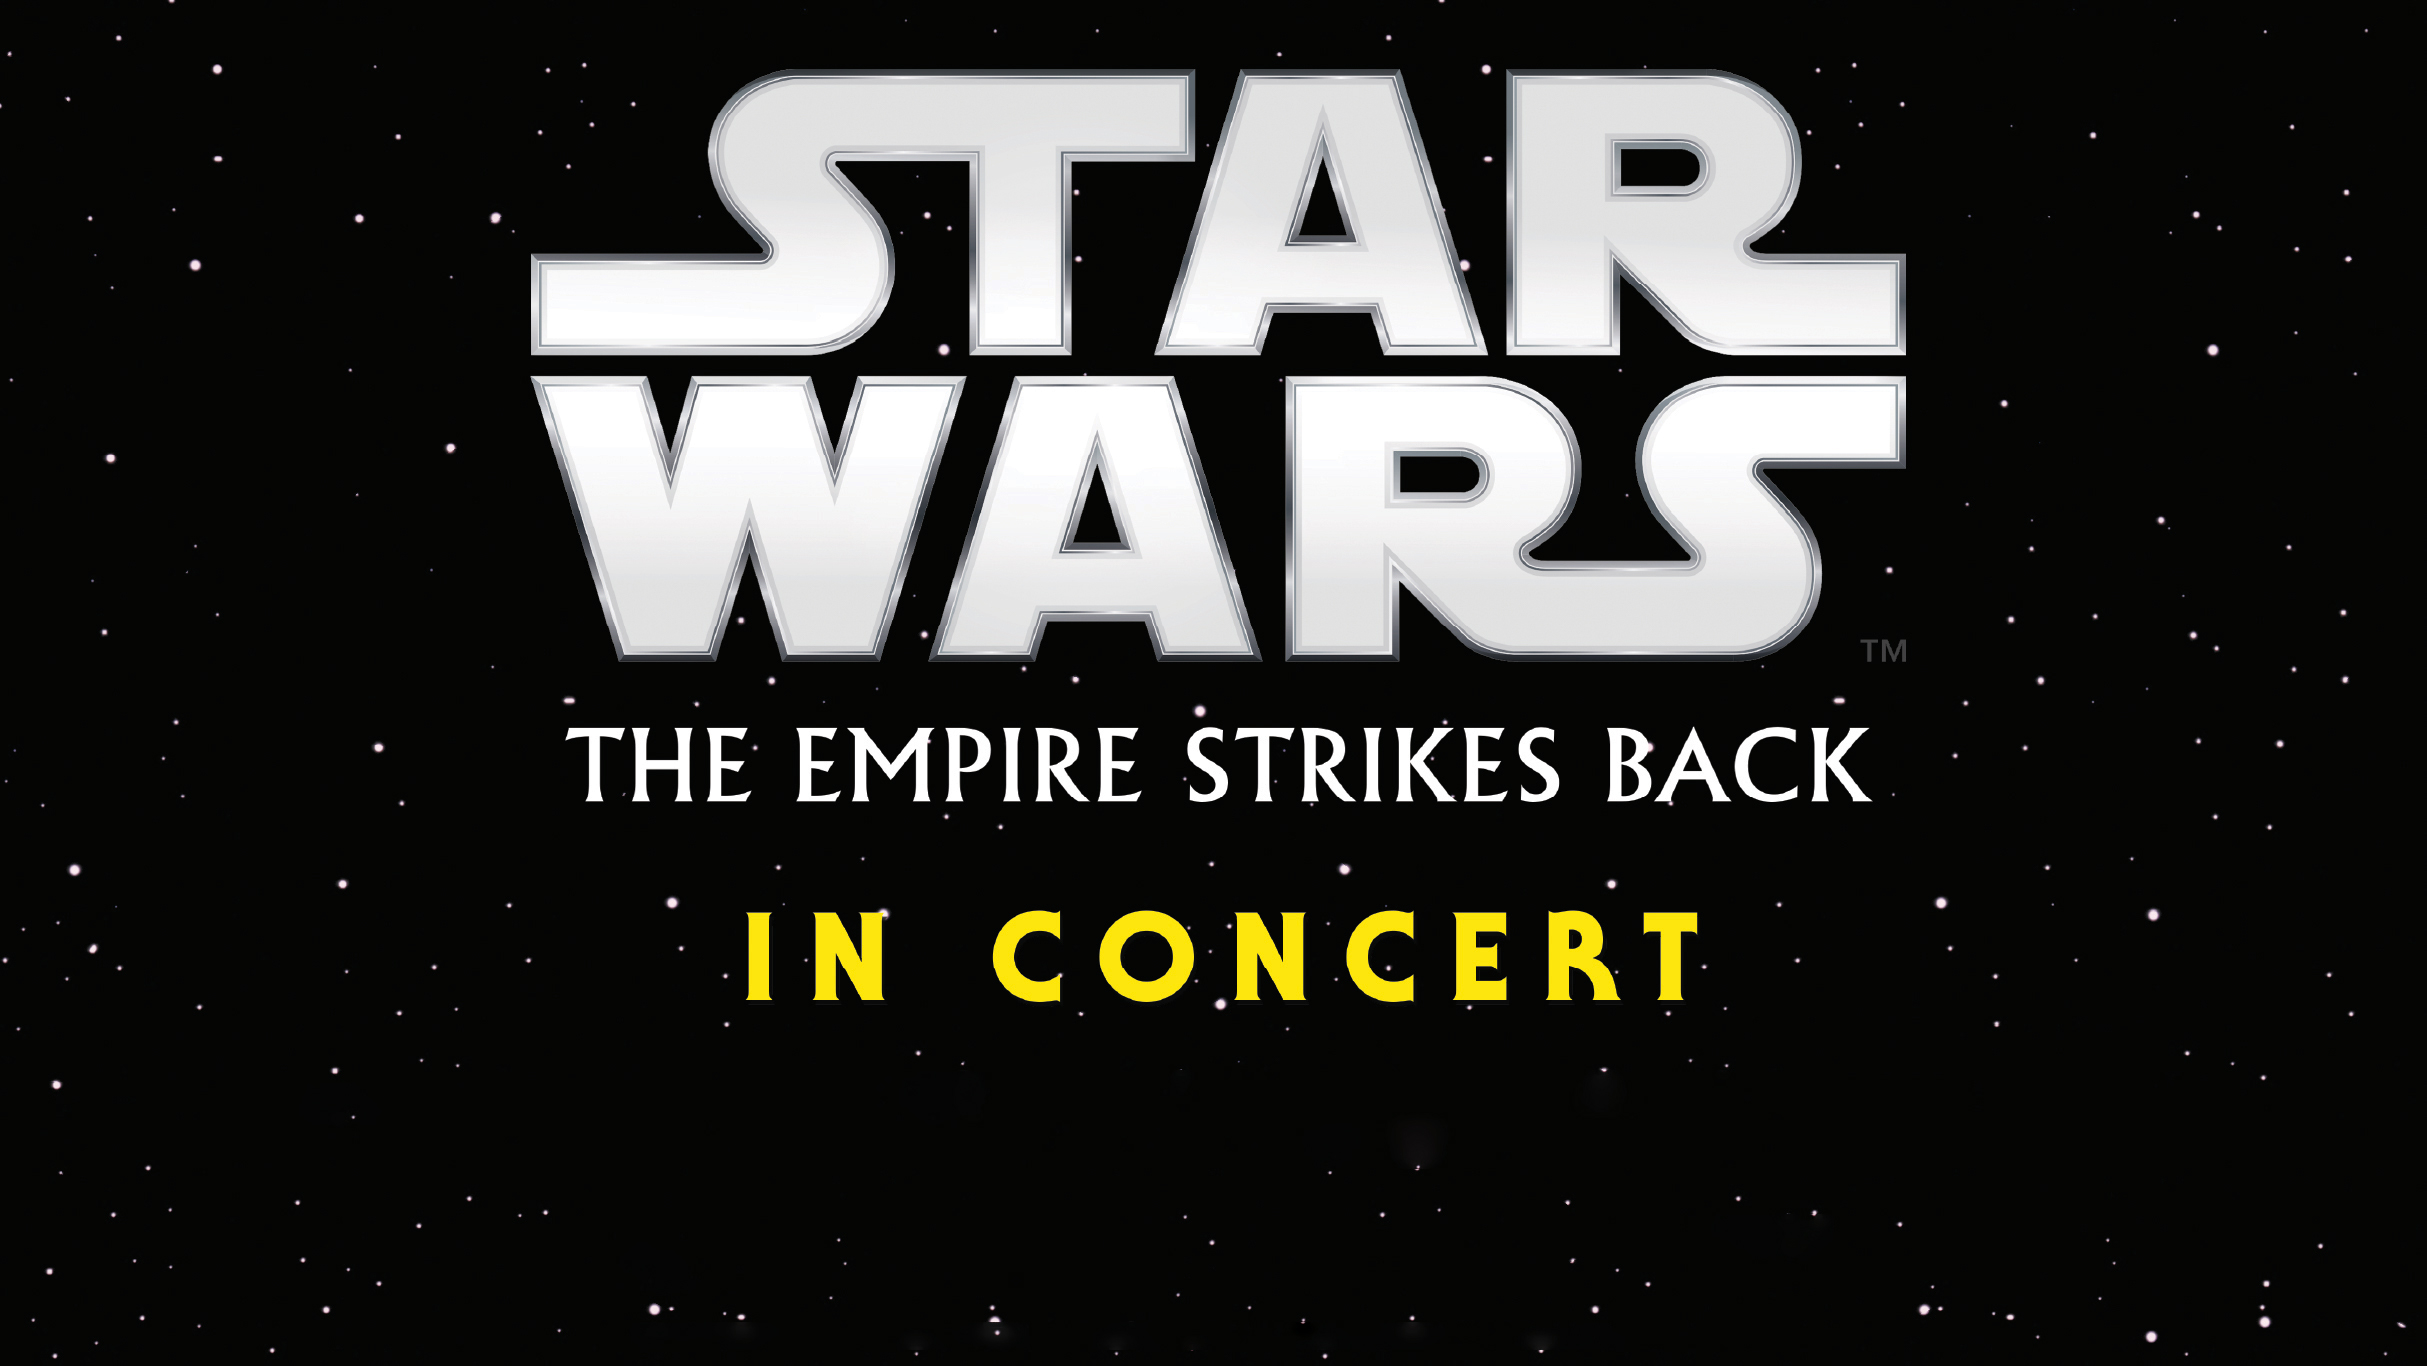 Star Wars: The Empire Strikes Back - In Concert